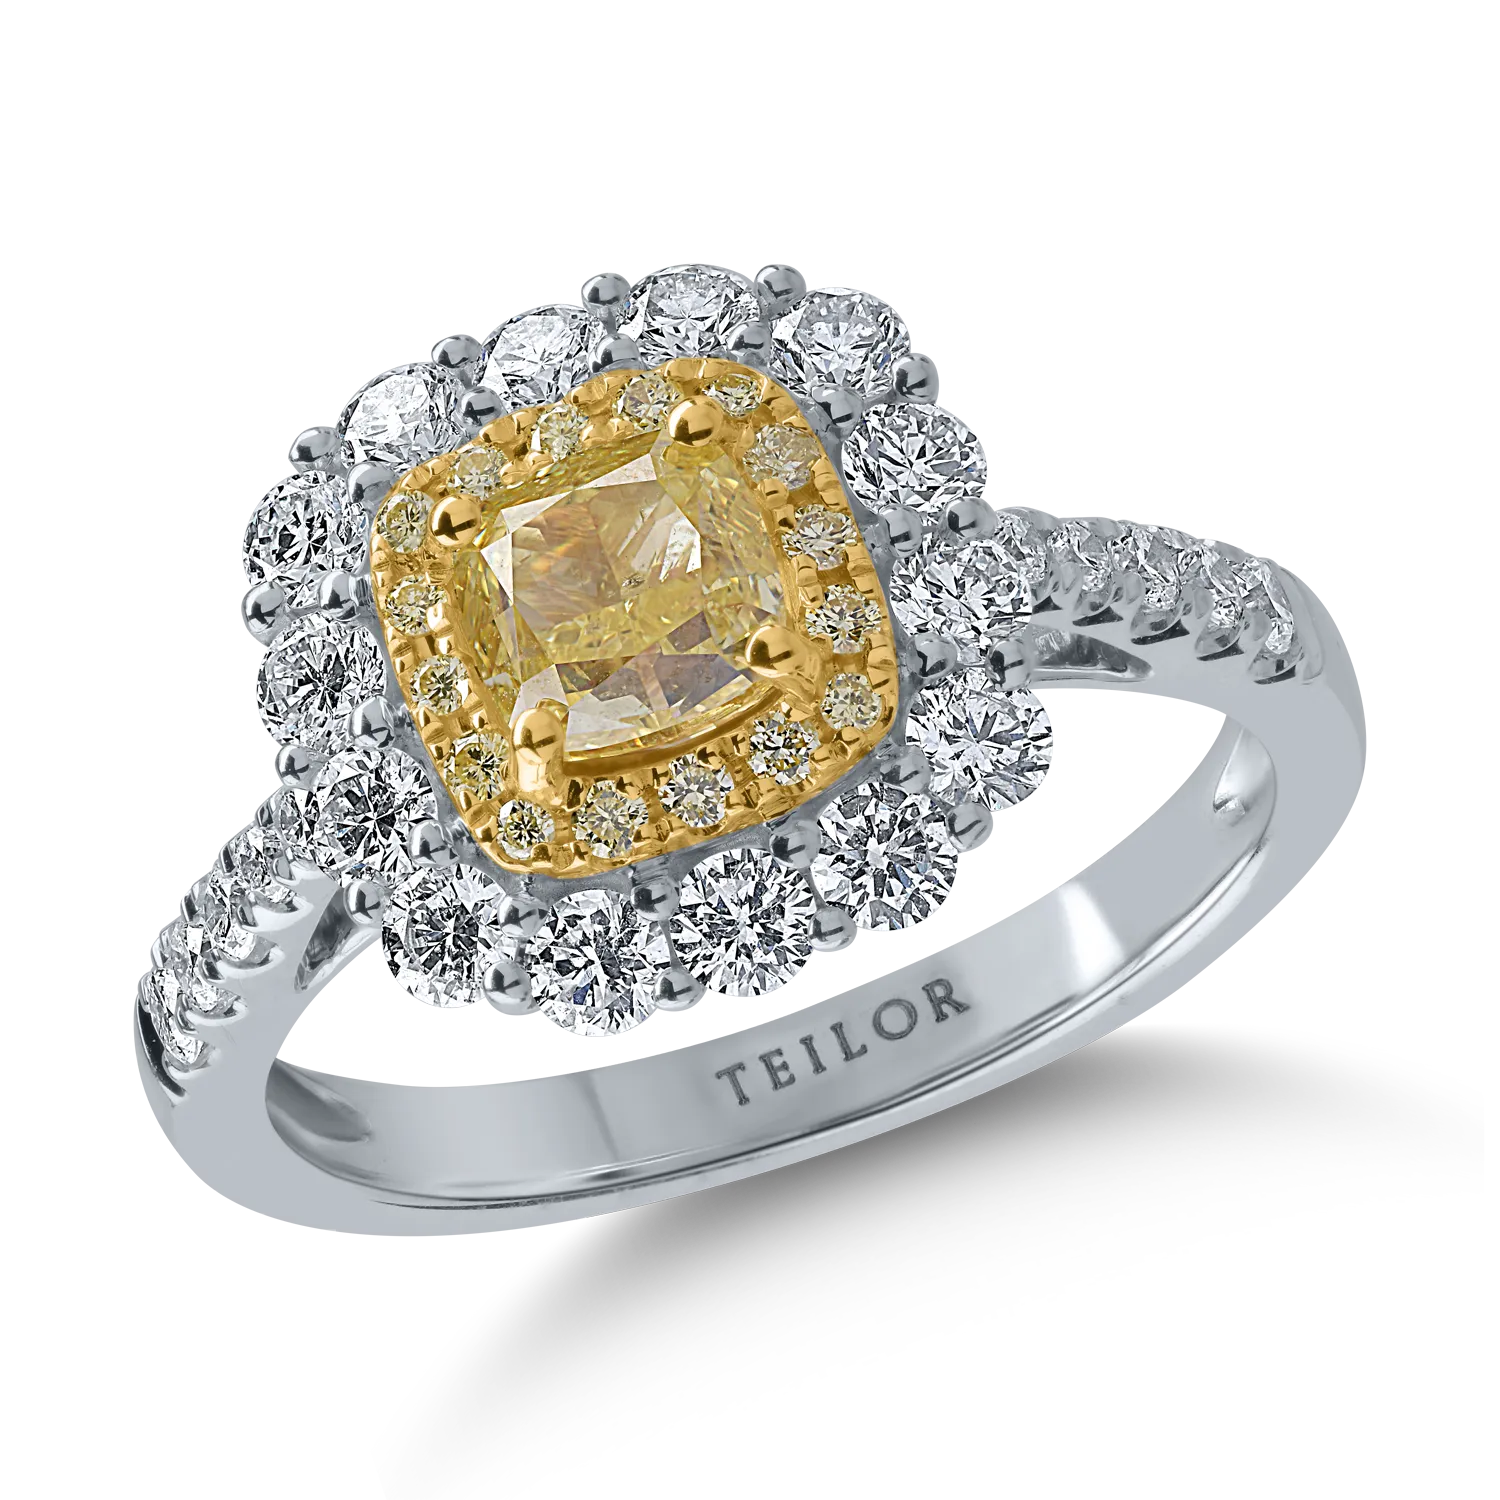 White-yellow gold ring with 1.12ct yellow diamonds and 0.88ct clear diamonds